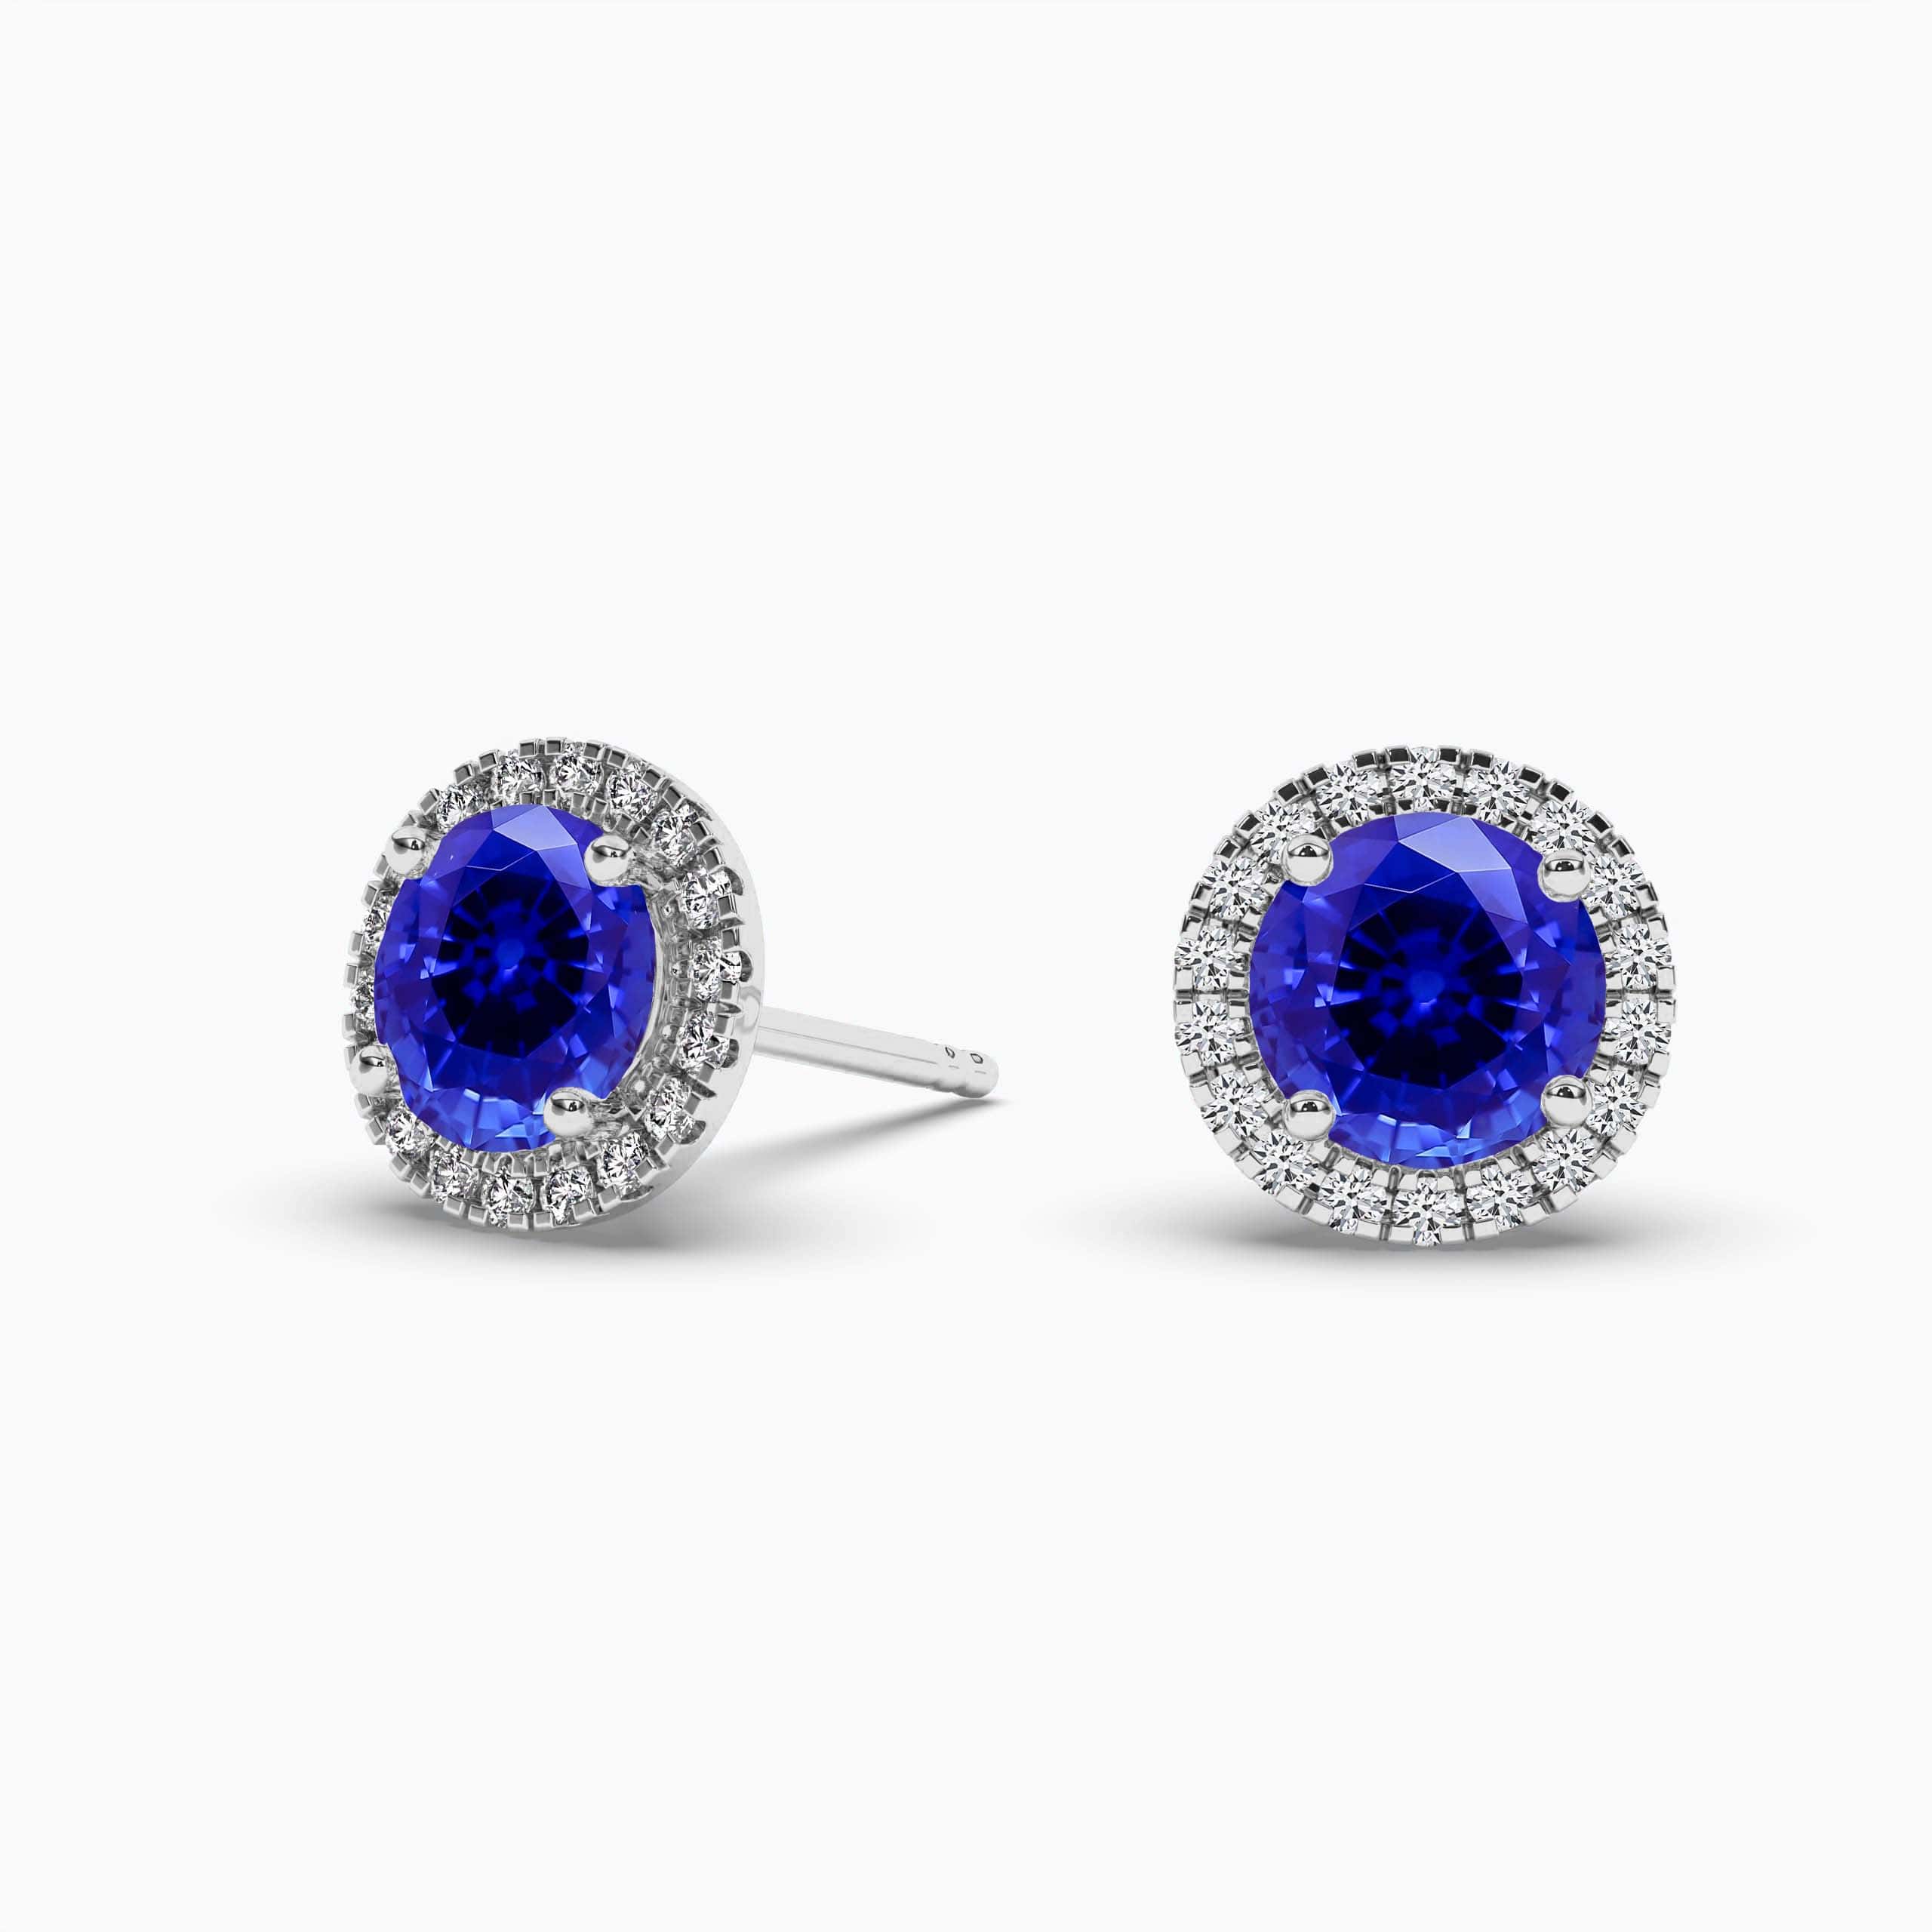 Round Sapphire Halo Earrings White Gold